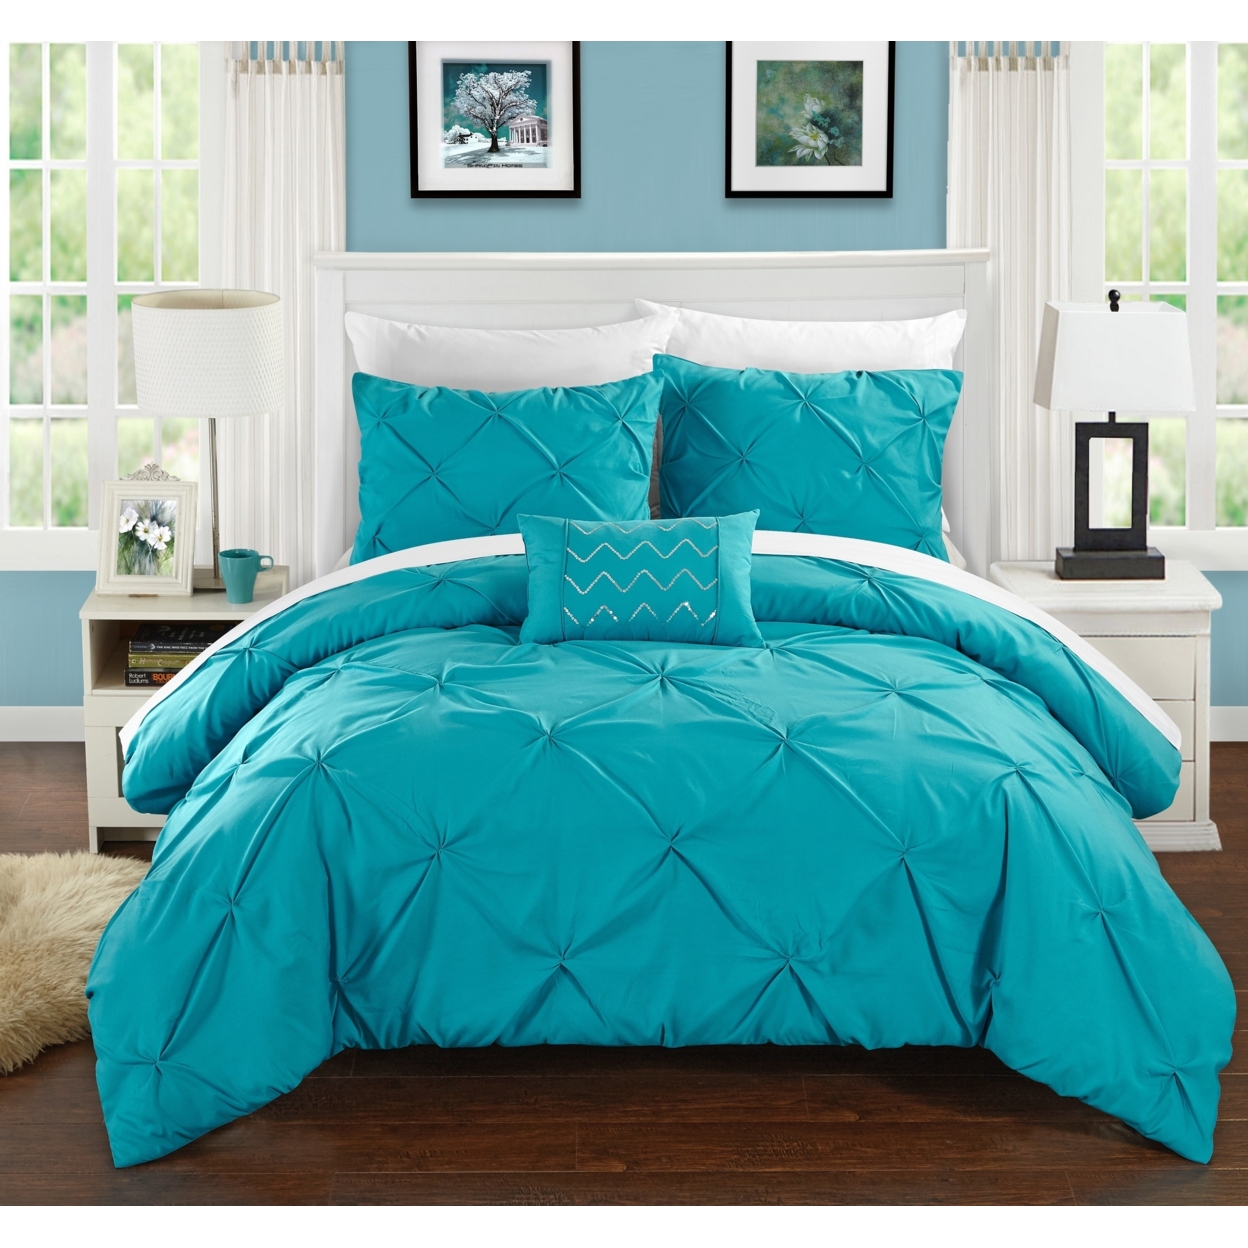 3 Or 4 Piece Whitley Pinch Pleated, Ruffled And Pleated Complete Duvet Cover Set Shams And Decorative Pillows Included - Turquoise, Twin